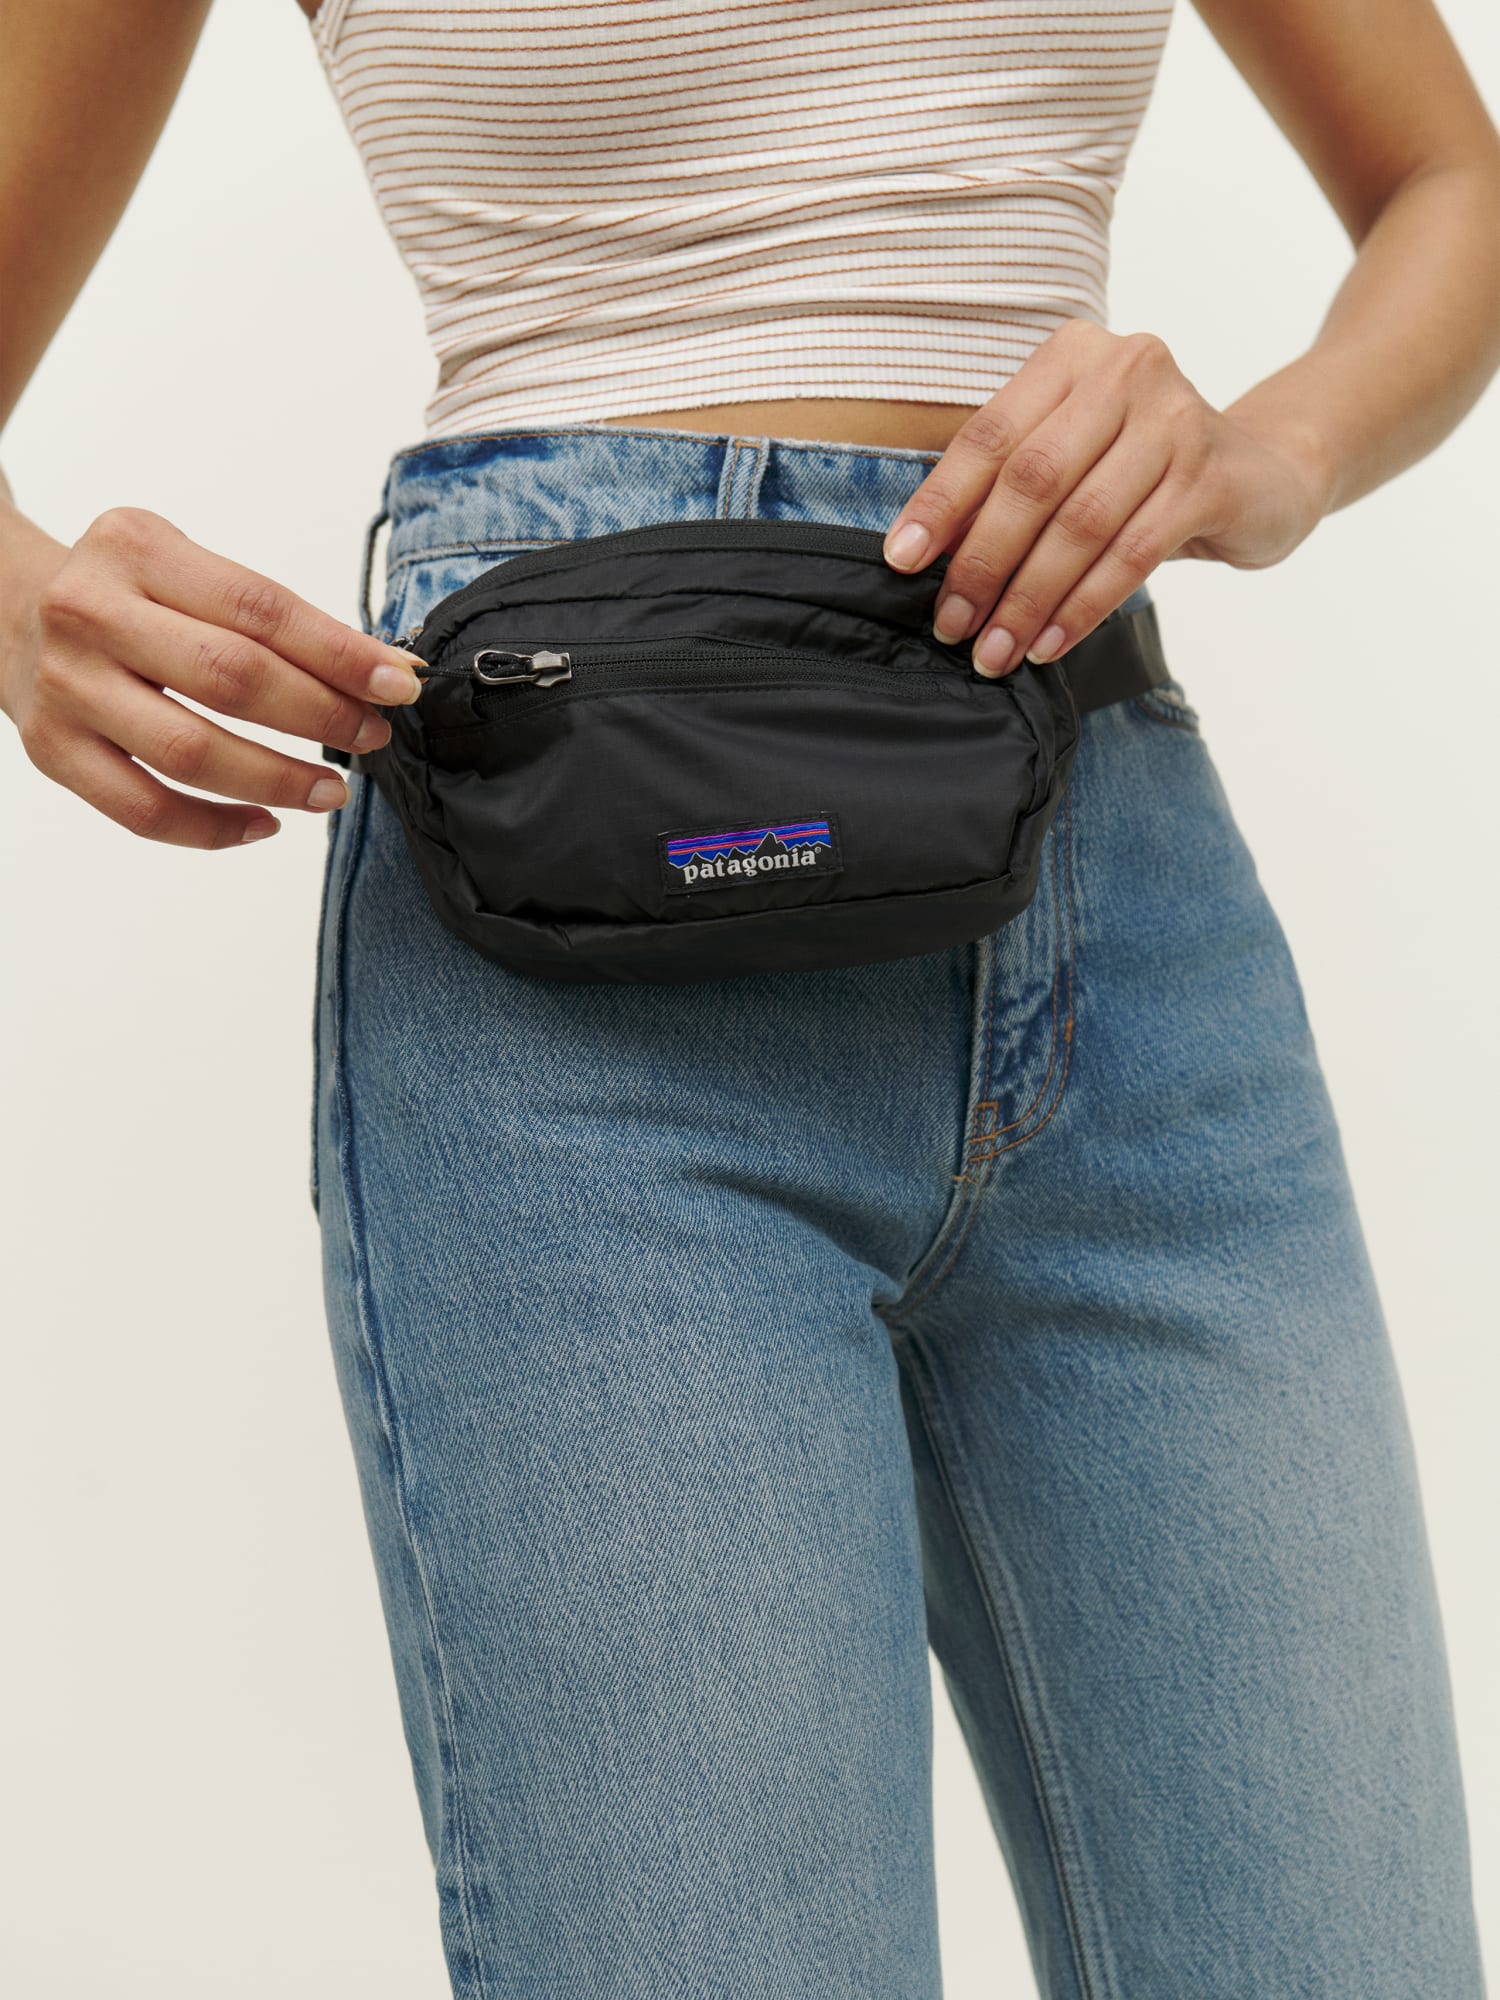 Fanny Packs? - Page 2 